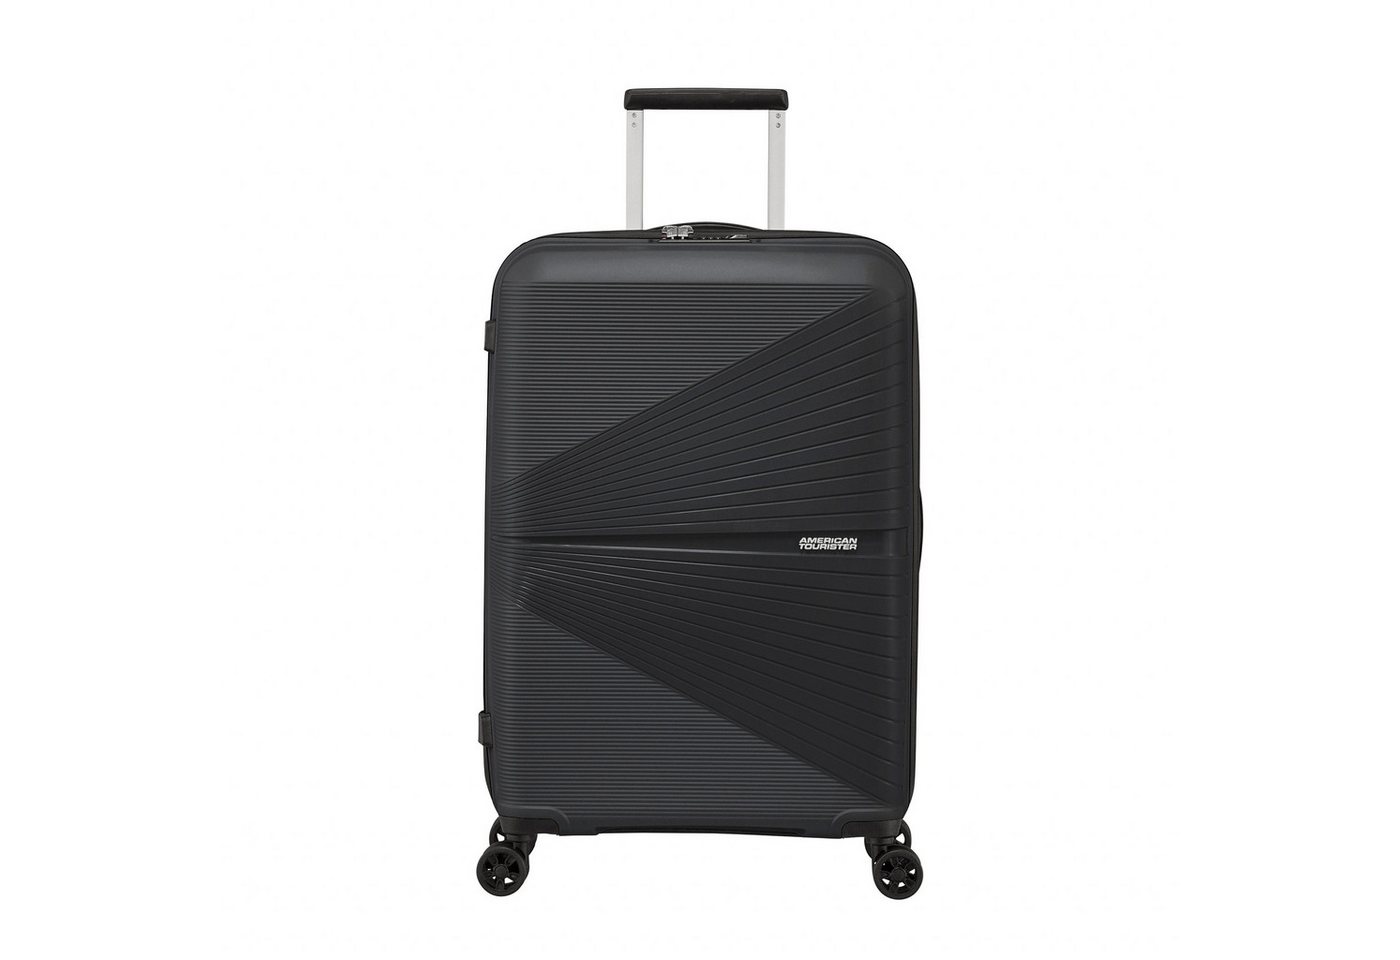 American Tourister® Koffer Airconic Spinner 67, 4 Rollen von American Tourister®